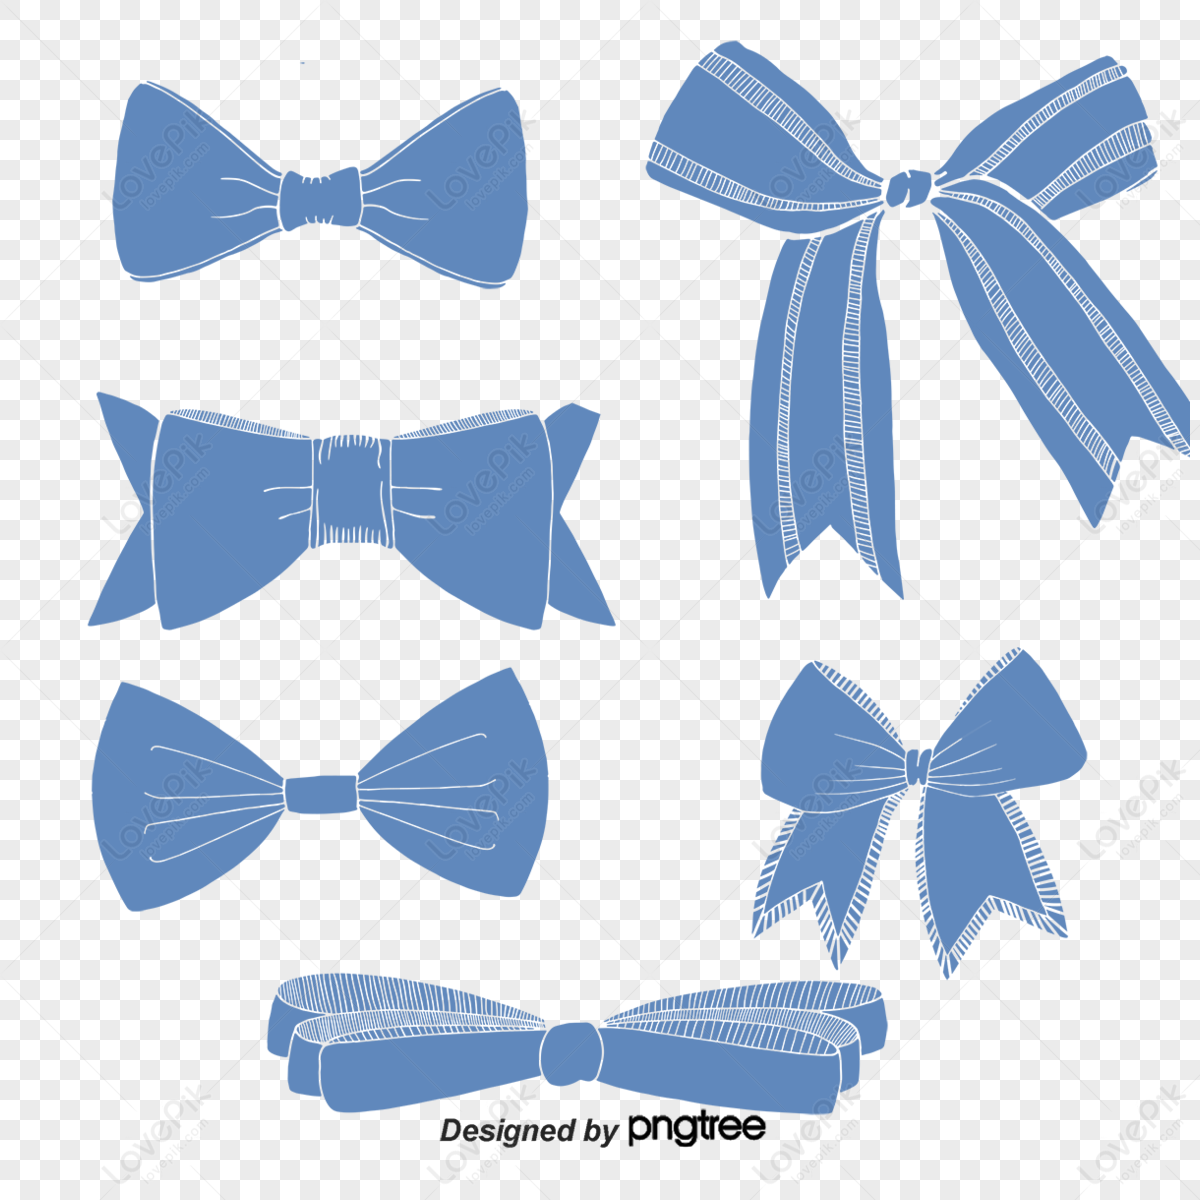 Download premium png of Bow png sticker, blue design element, transparent  background by Boom about ribbon, bow, blue bow, blue ribbon,… in 2023